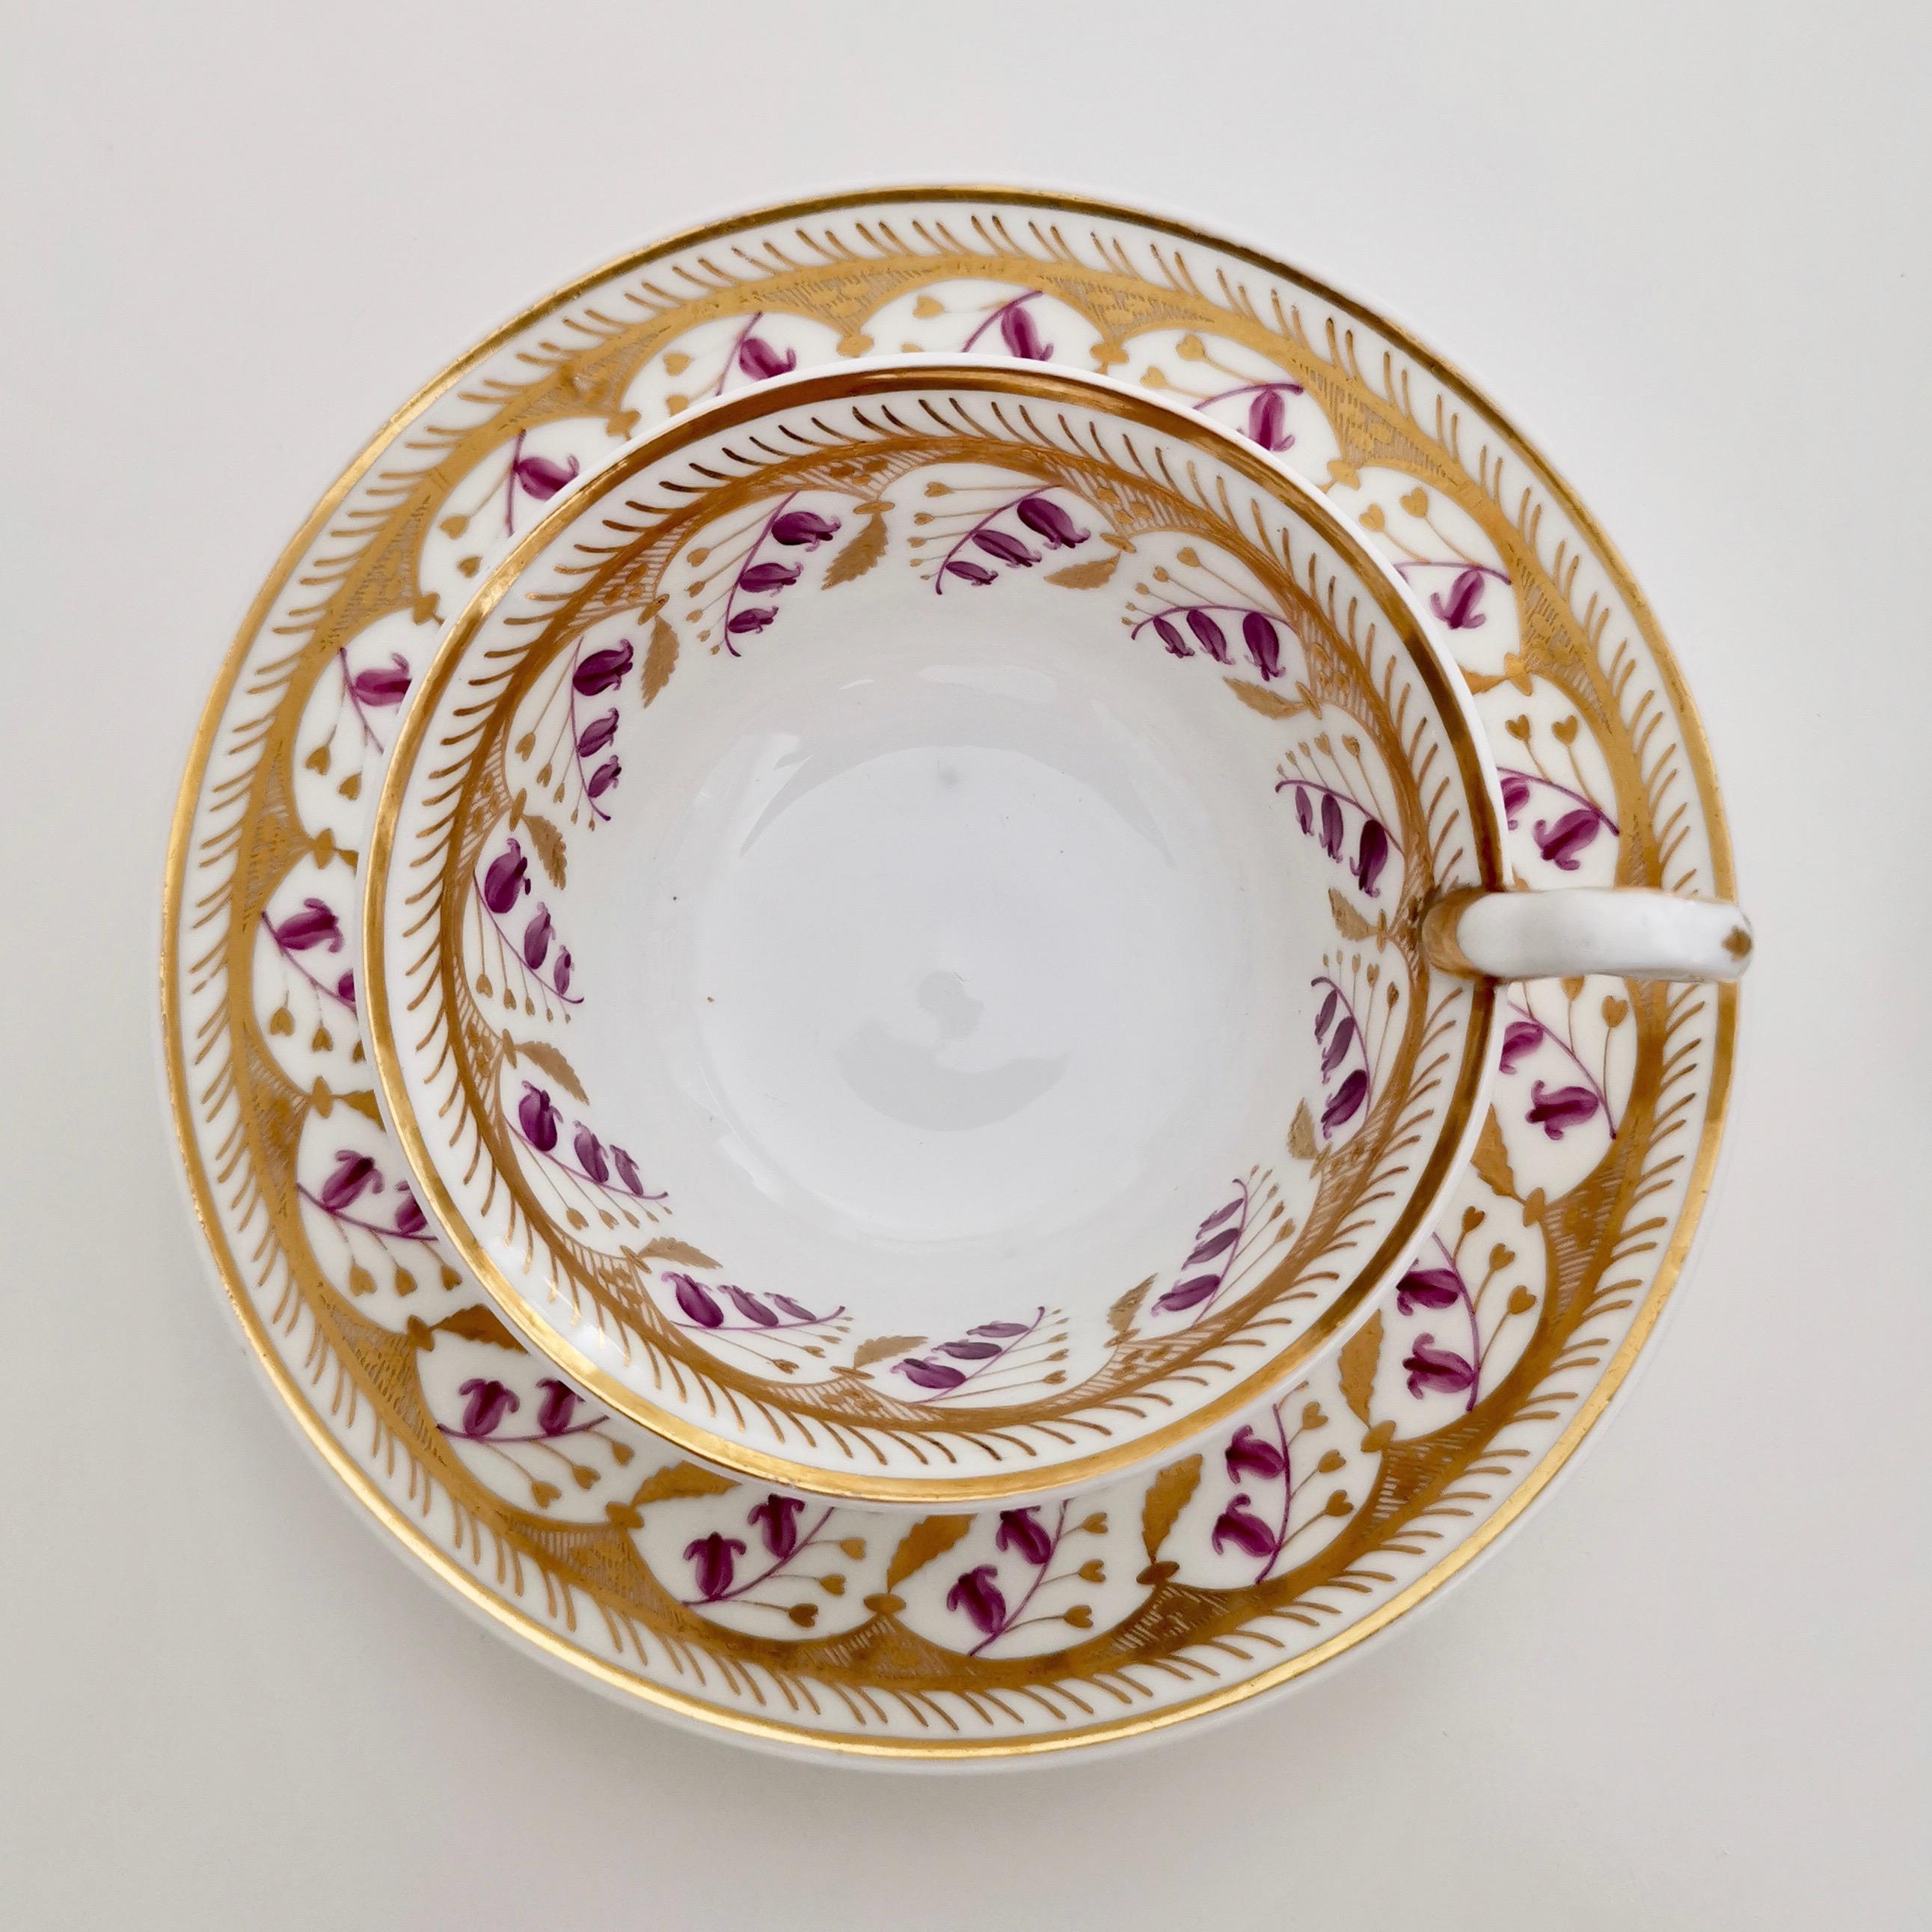 Hand-Painted Spode Felspar Porcelain Teacup Trio, White with Harebell Pattern, Regency, 1826